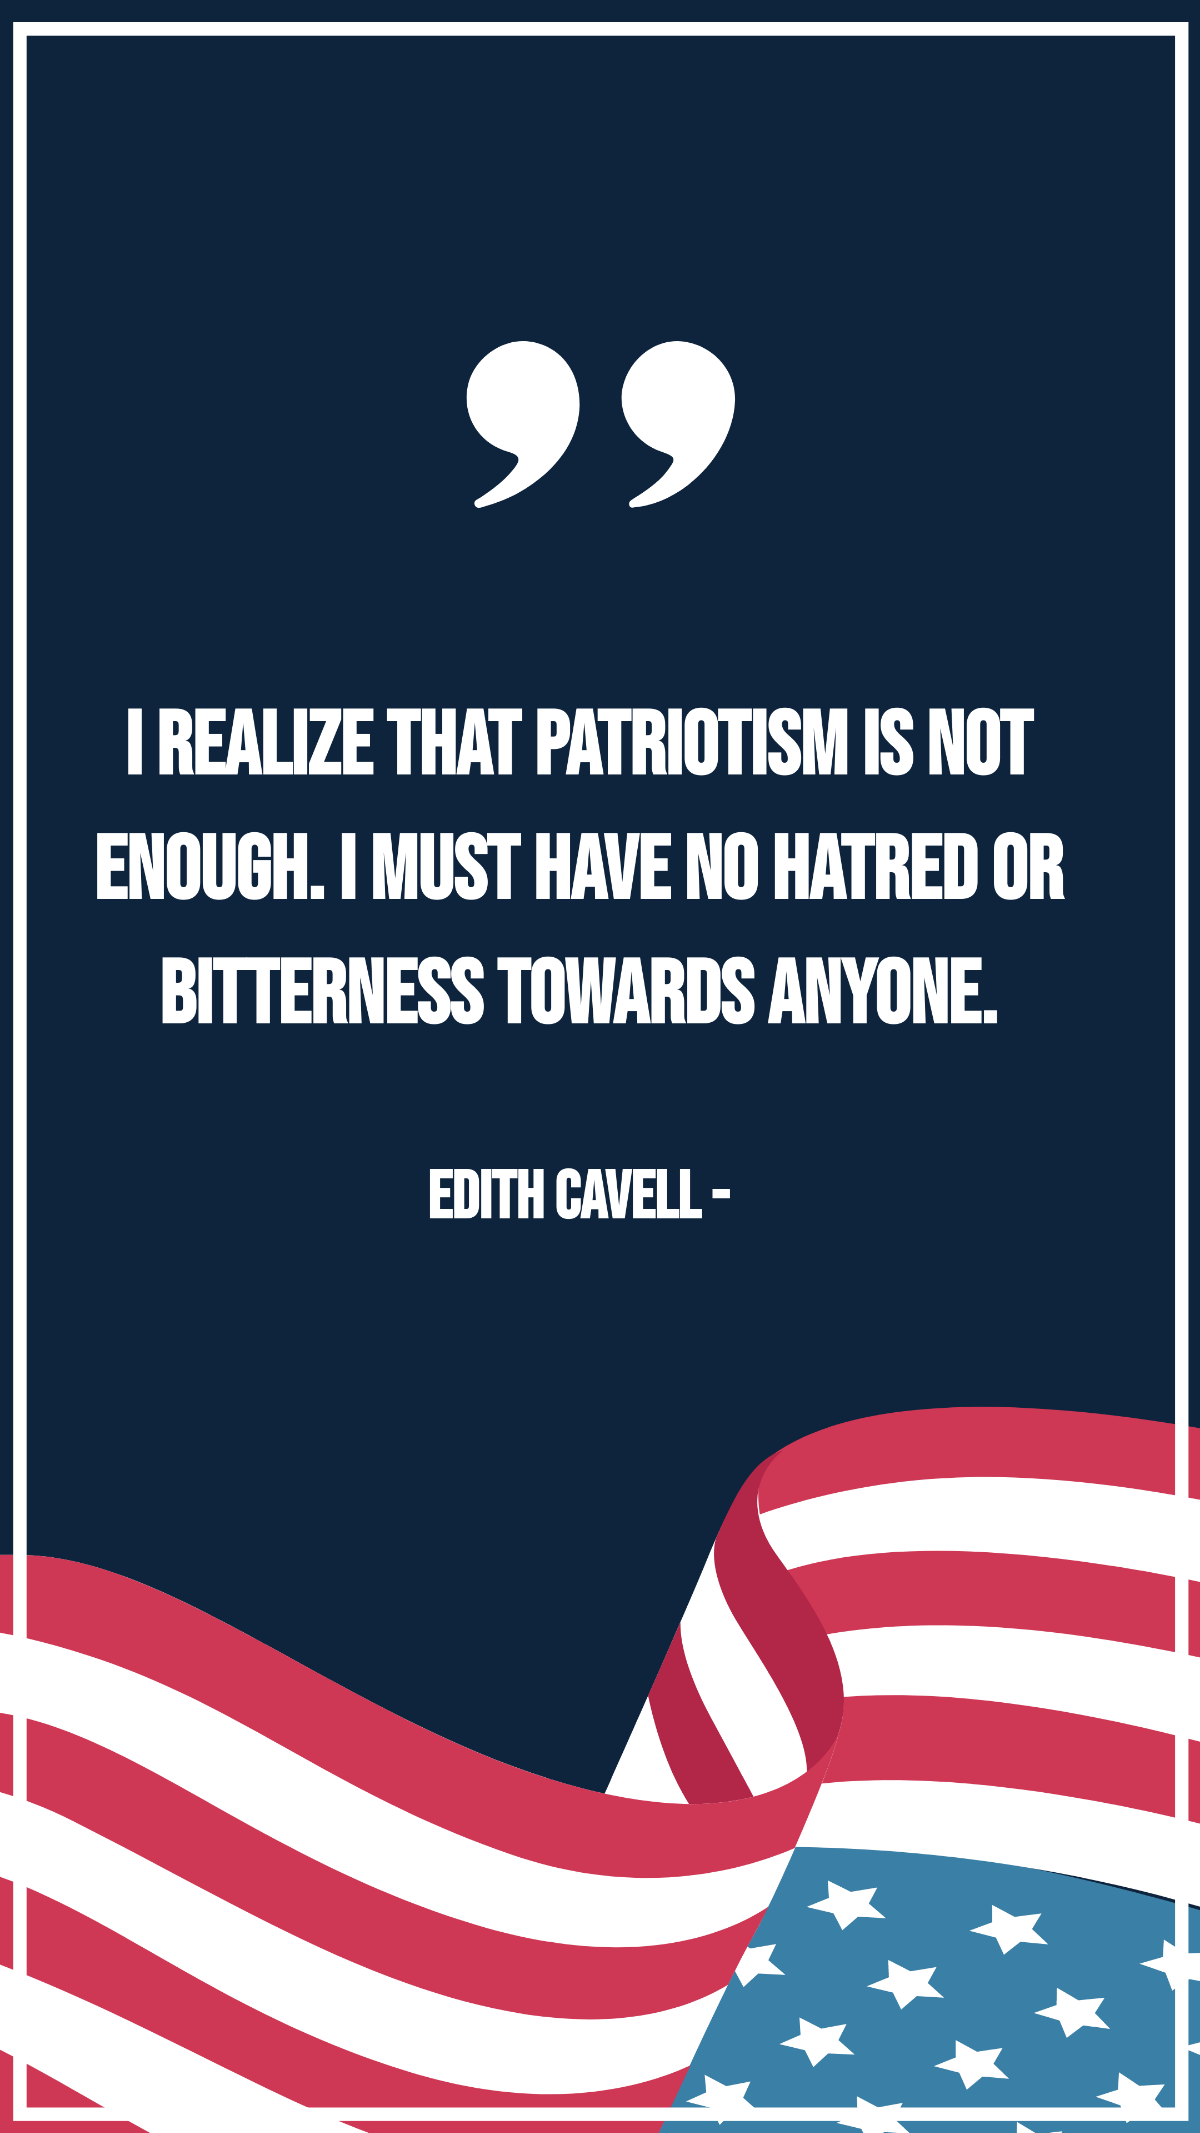 Edith Cavell - I realize that patriotism is not enough. I must have no hatred or bitterness towards anyone. Template